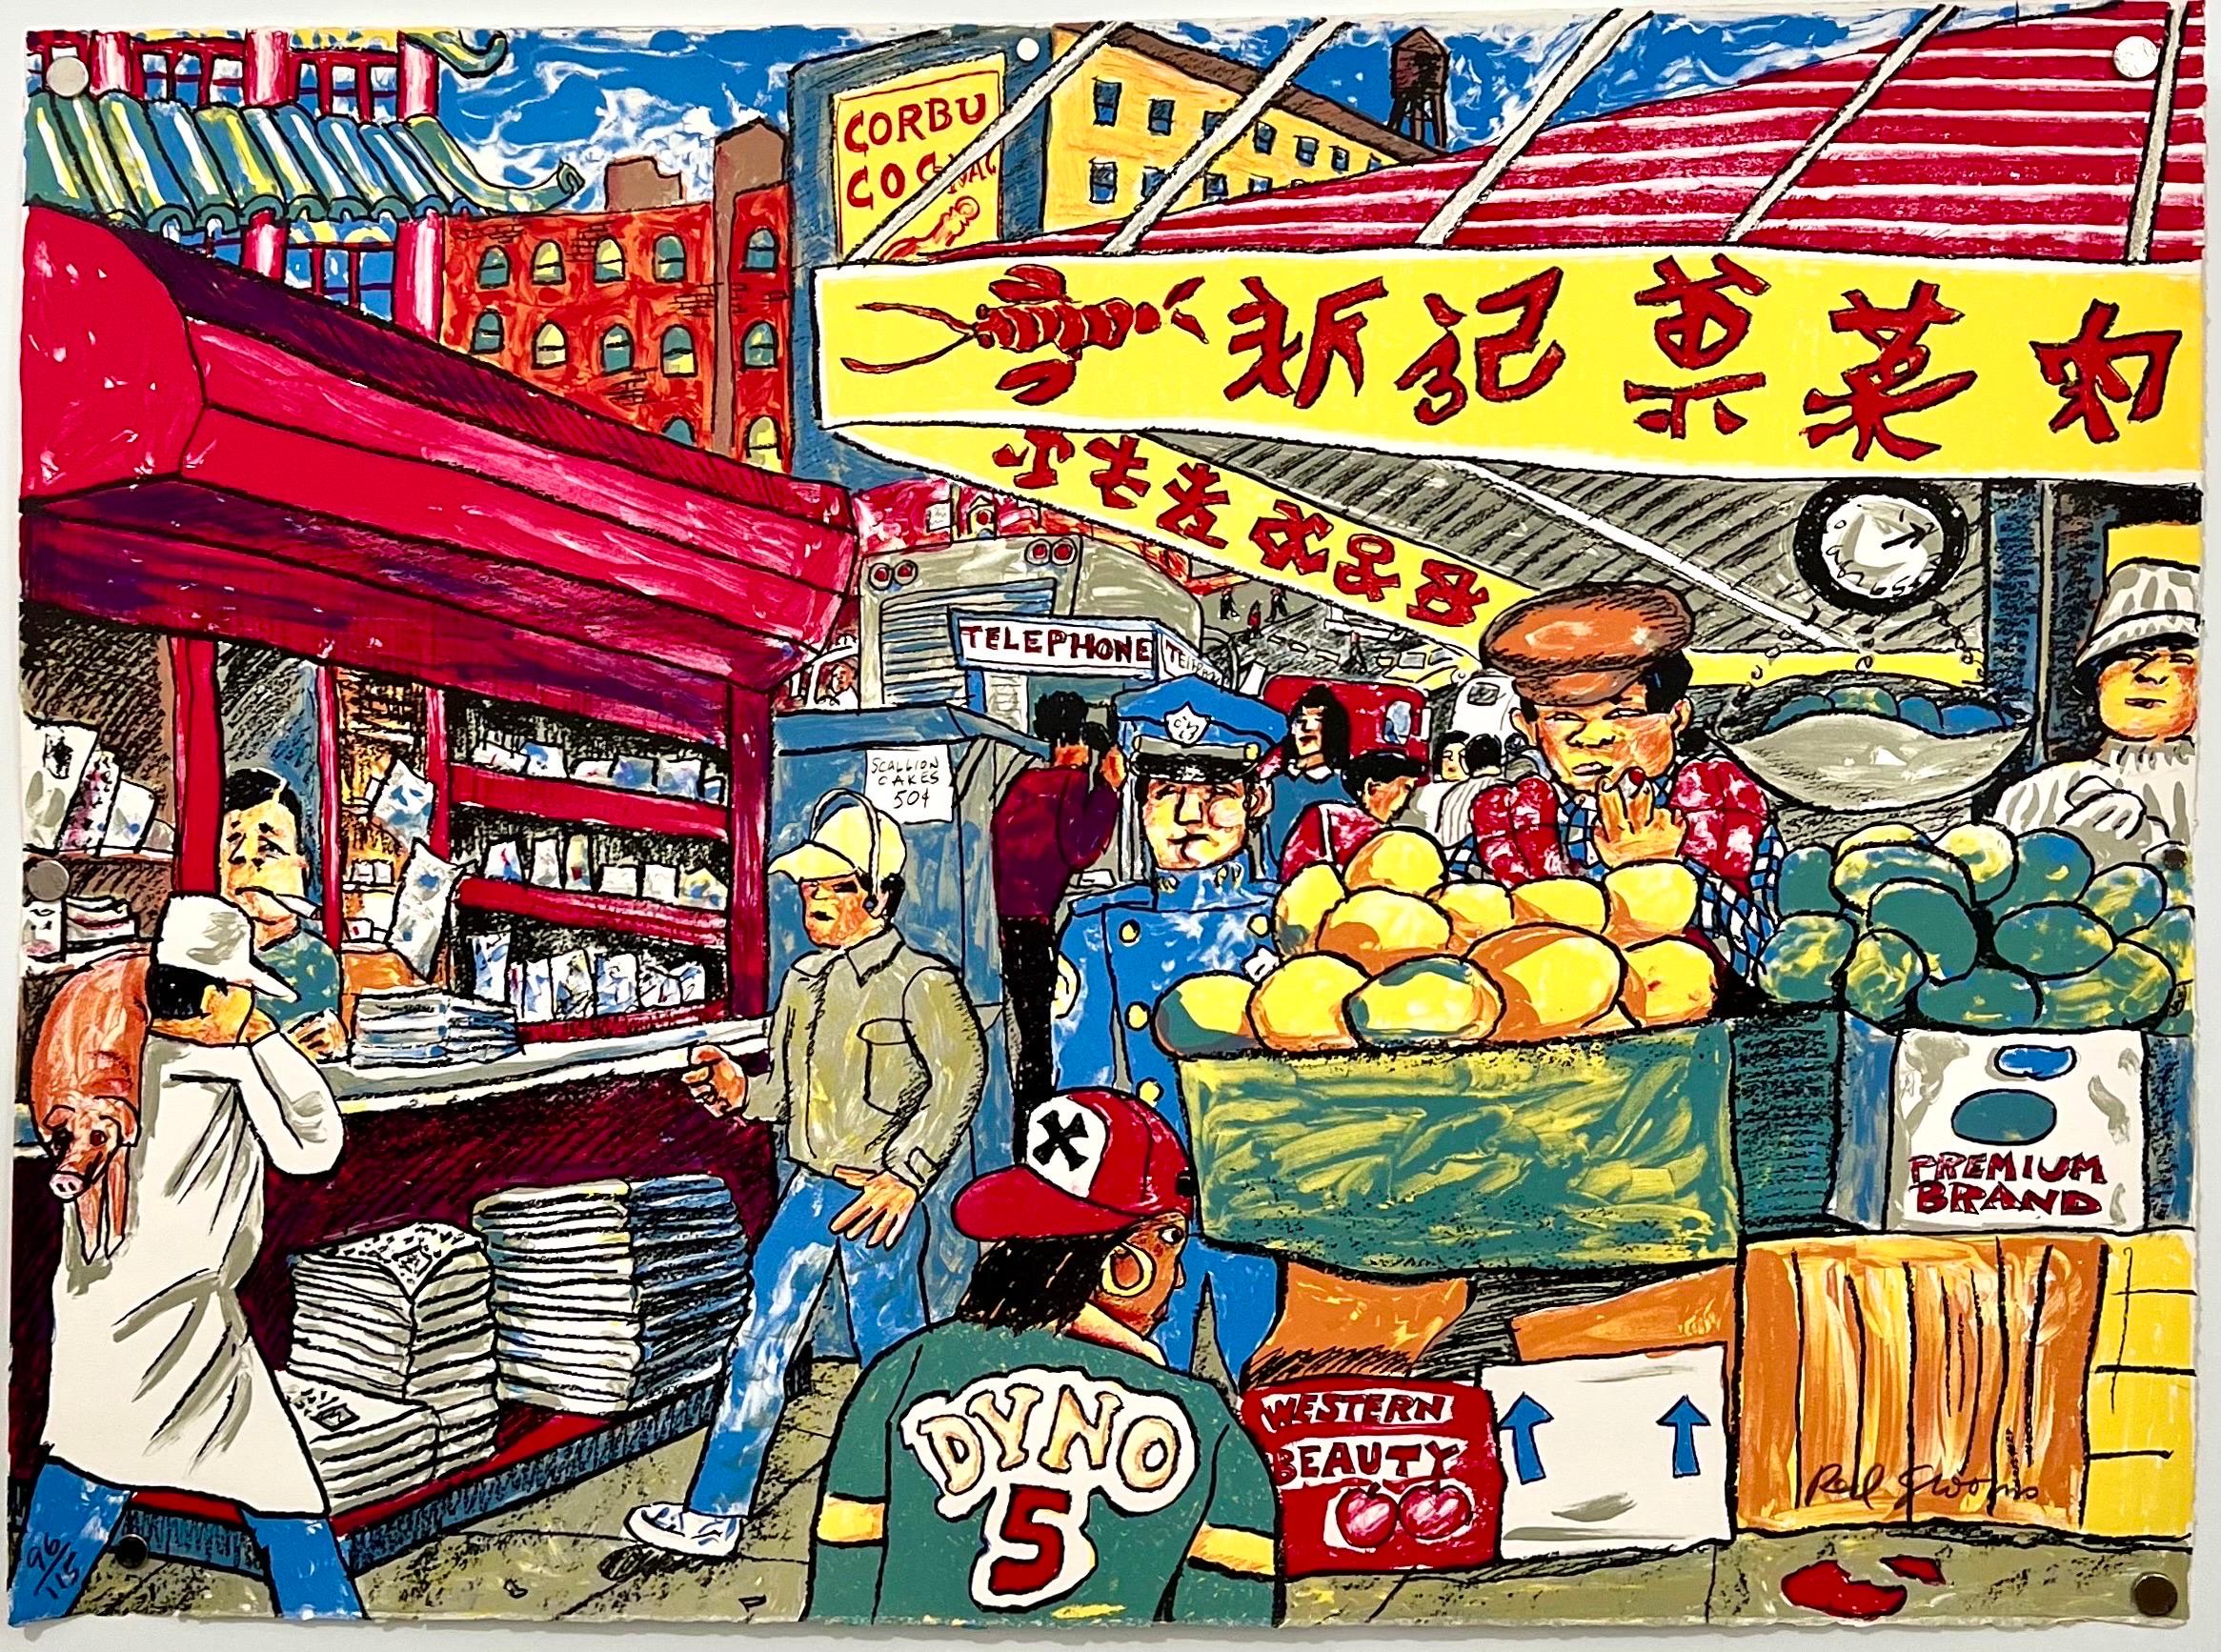 Red Grooms (American, b. 1937). 
Lithograph in colors on wove paper, 1993
"East of Canal Street, Corner of Canal."
Published by the Brooklyn Museum 
(Reference:  Red Grooms: The Graphic Work, Walter G. Knestrick. Harry Abrams Inc Publishers, New